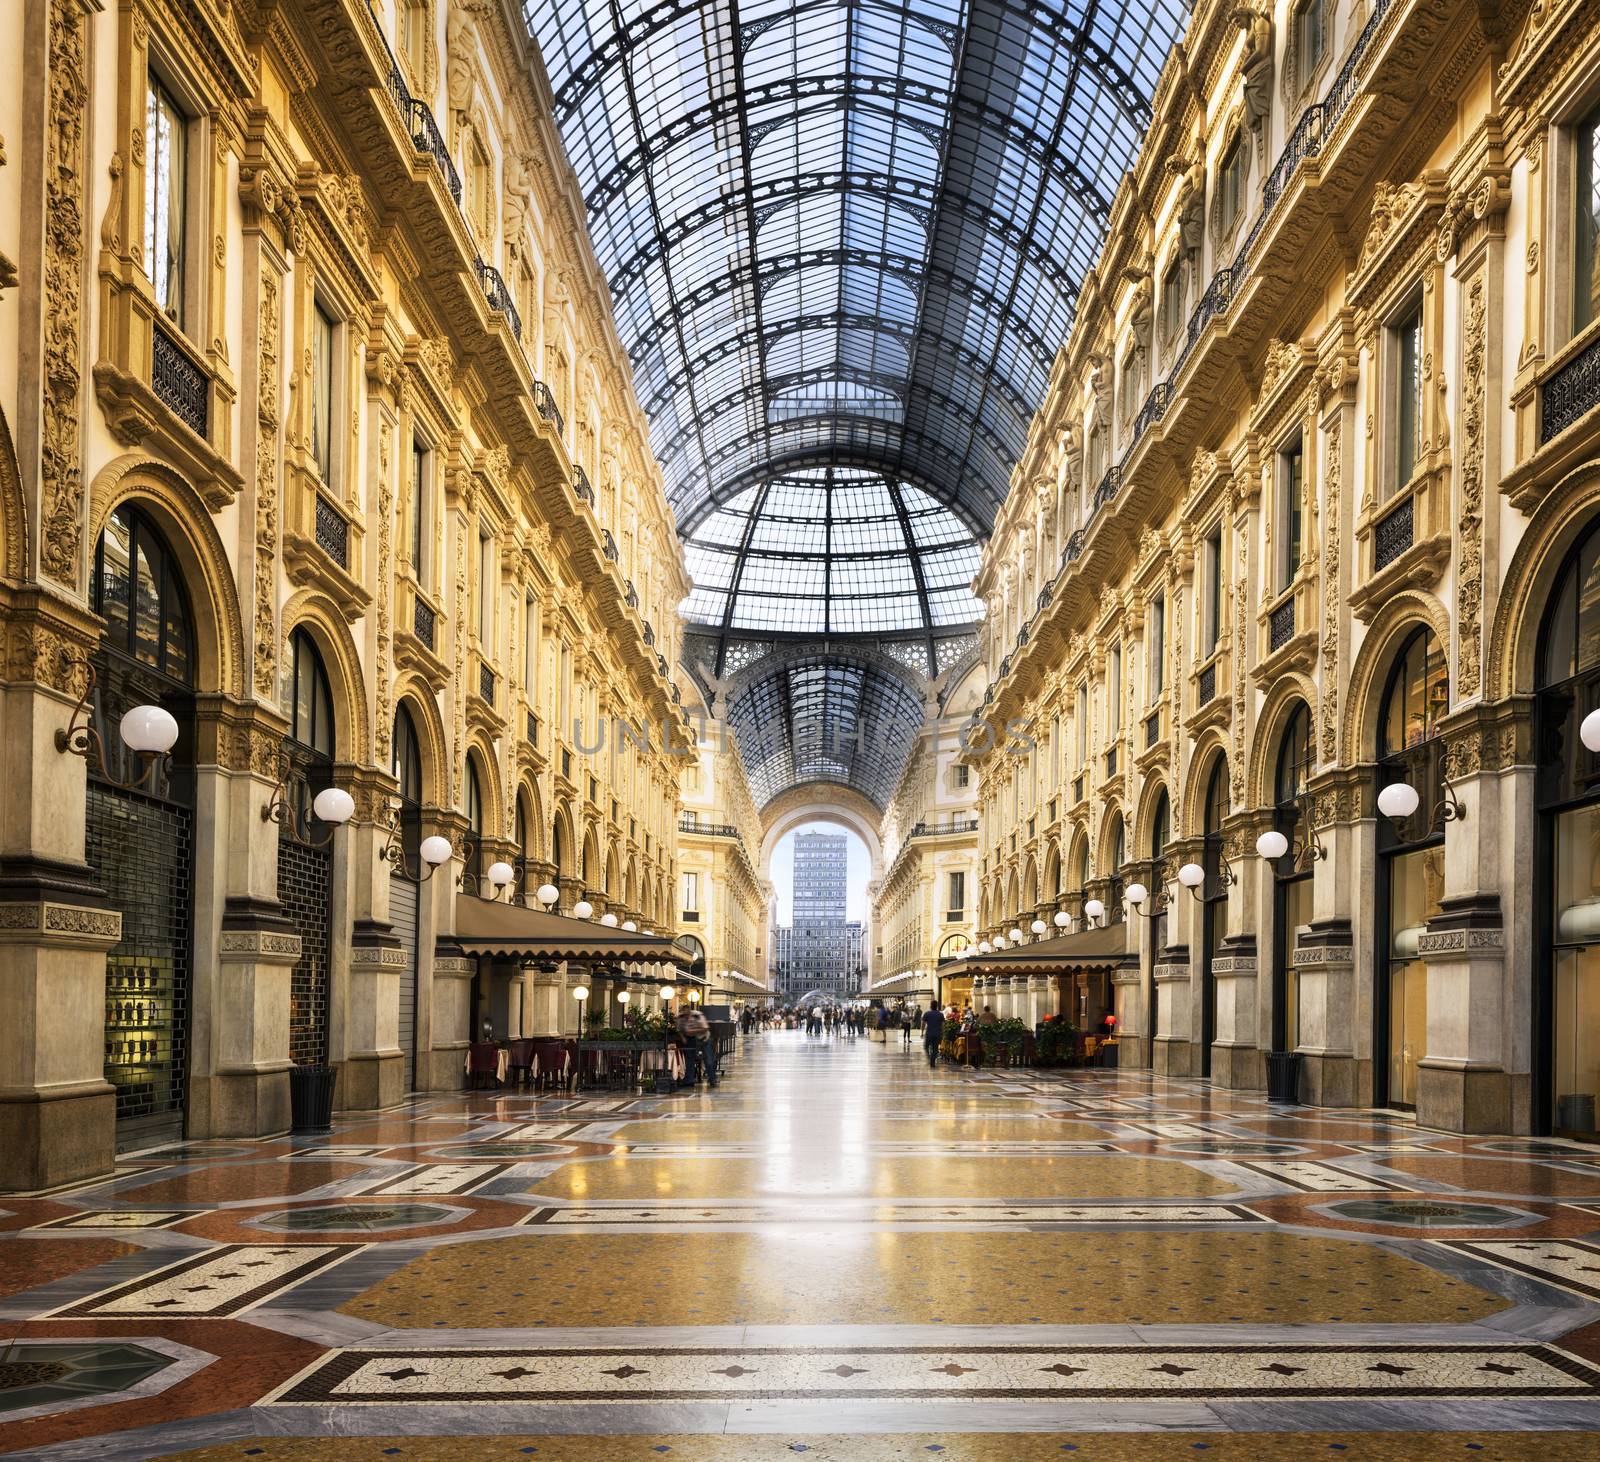 MILAN, ITALY - AUGUST 29, 2015: Luxury Store in Galleria Vittorio Emanuele II shopping mall in Milan, with tasted Italian restaurants